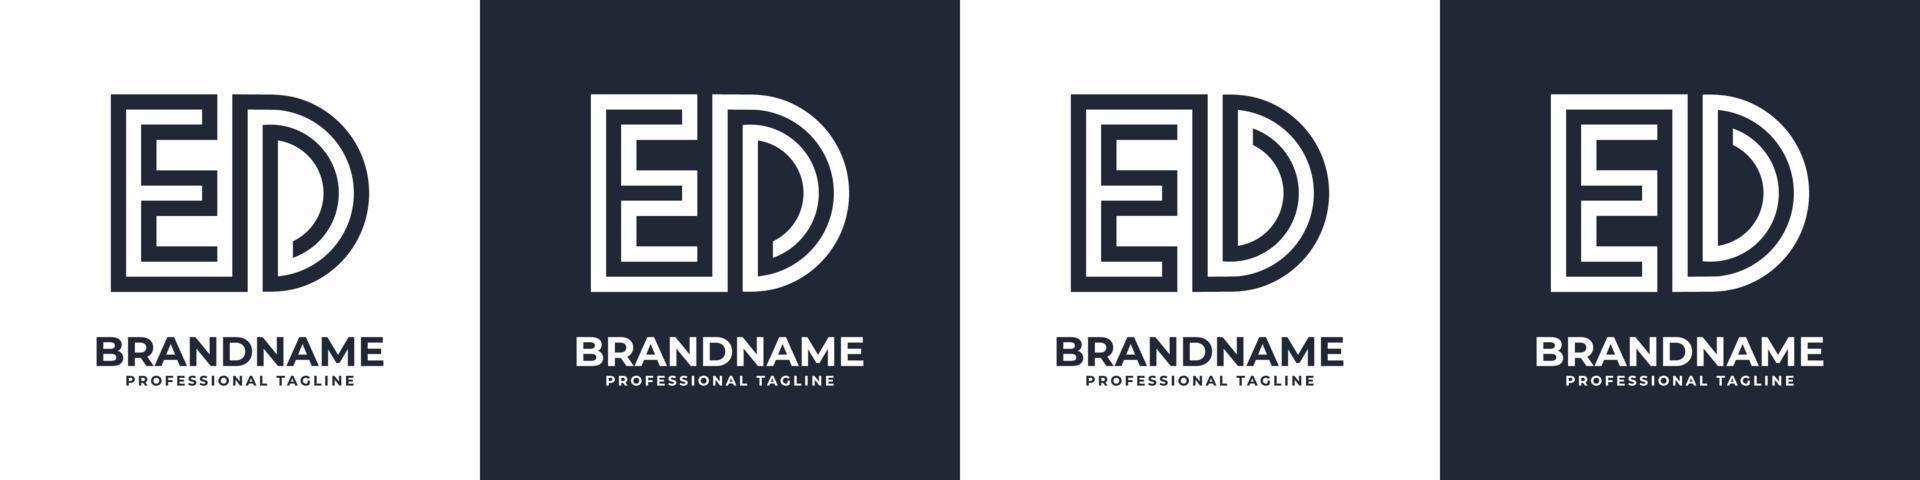 Simple ED Monogram Logo, suitable for any business with ED or DE initial. vector